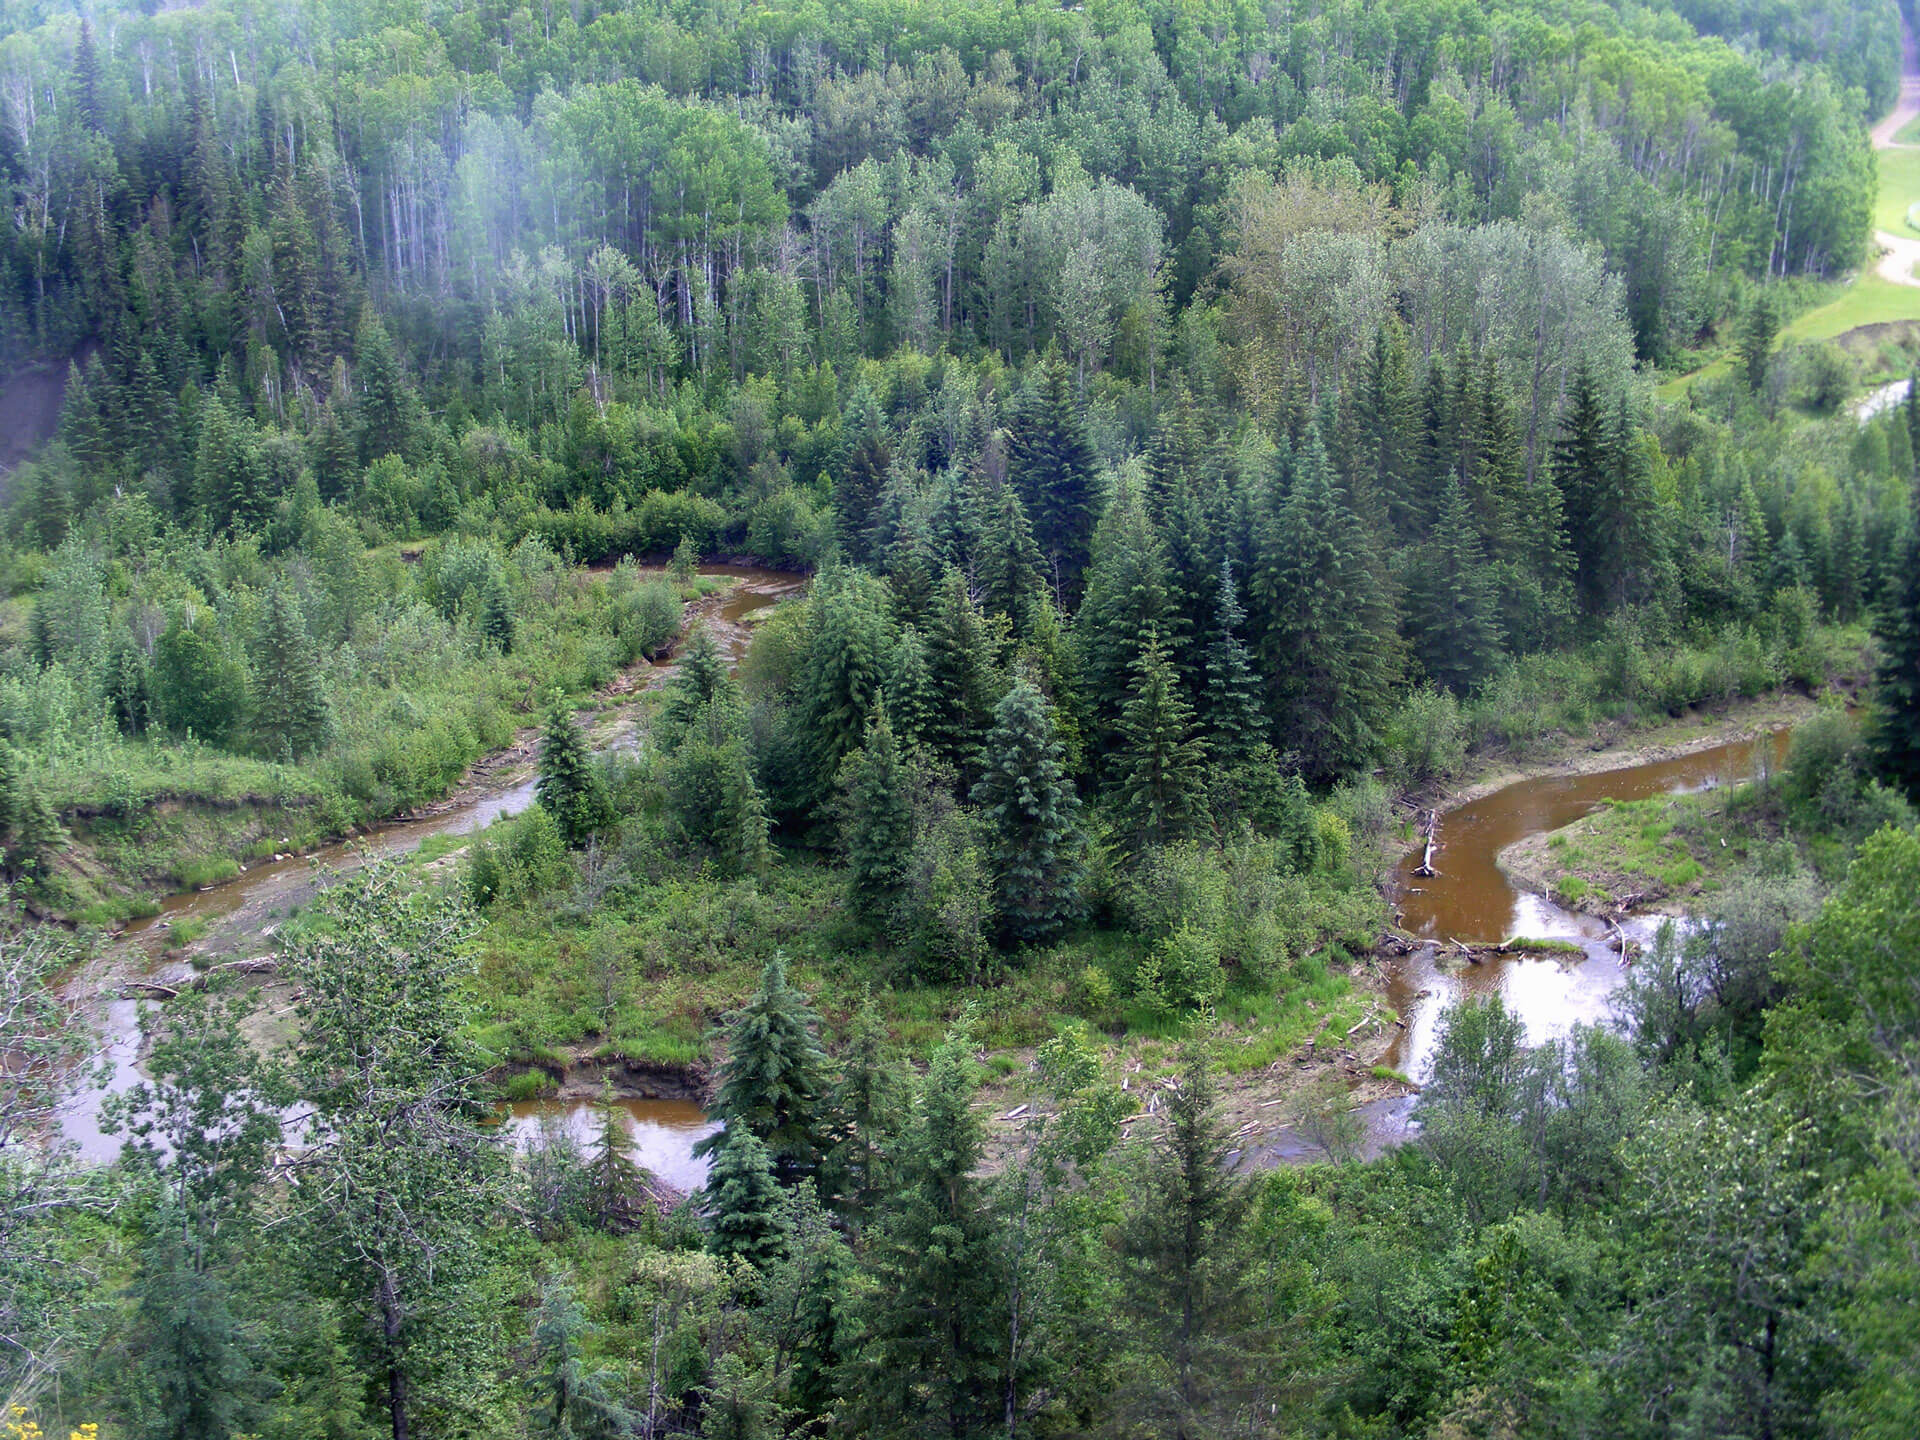 A view of the Muskeg Creek Valley with the trail system visible to the right